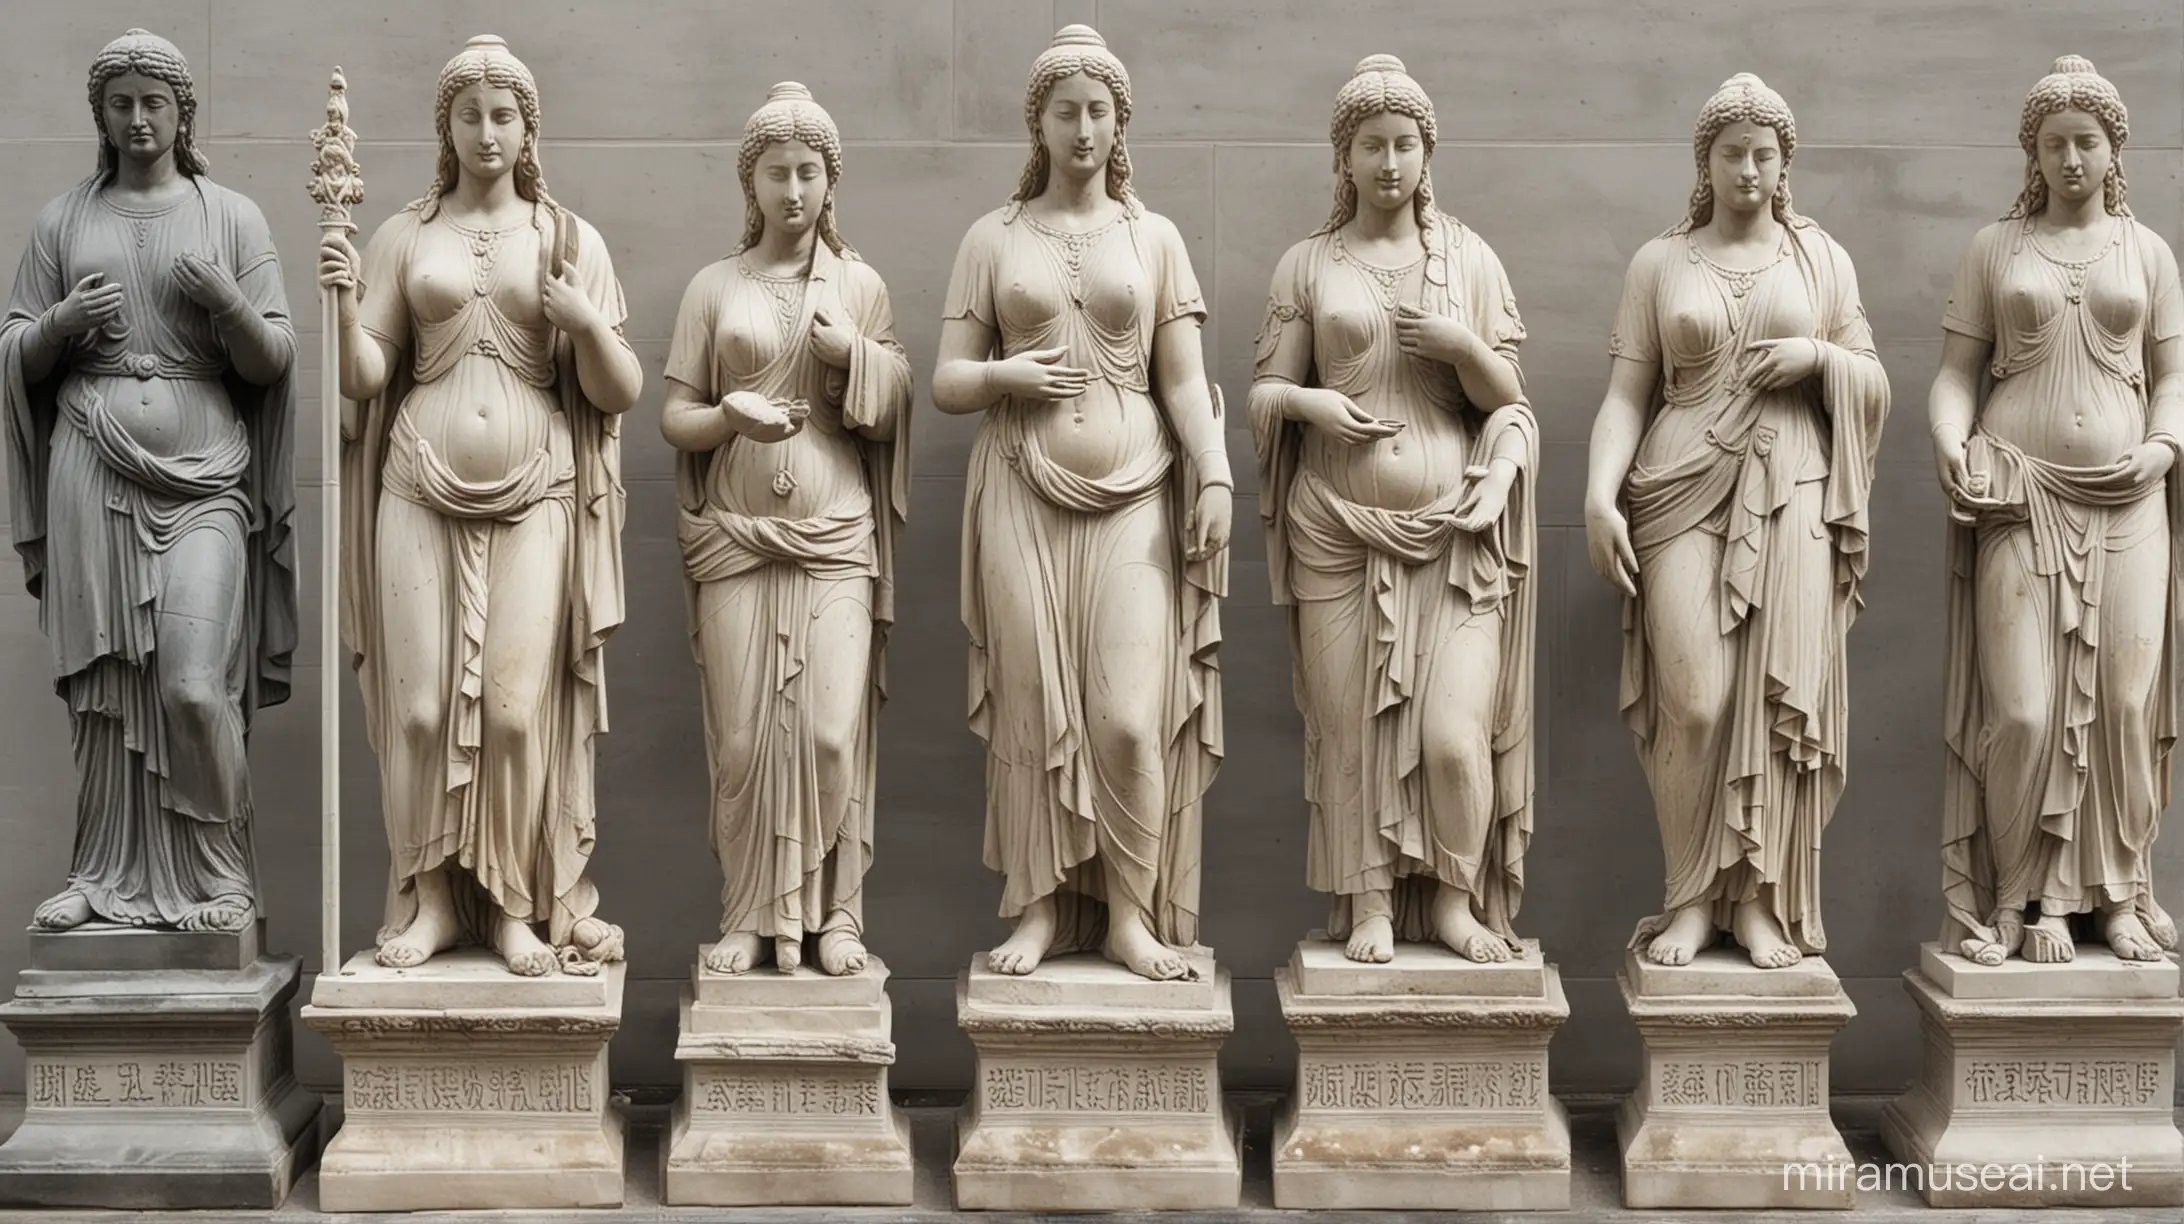 in image showing several different types of  statues